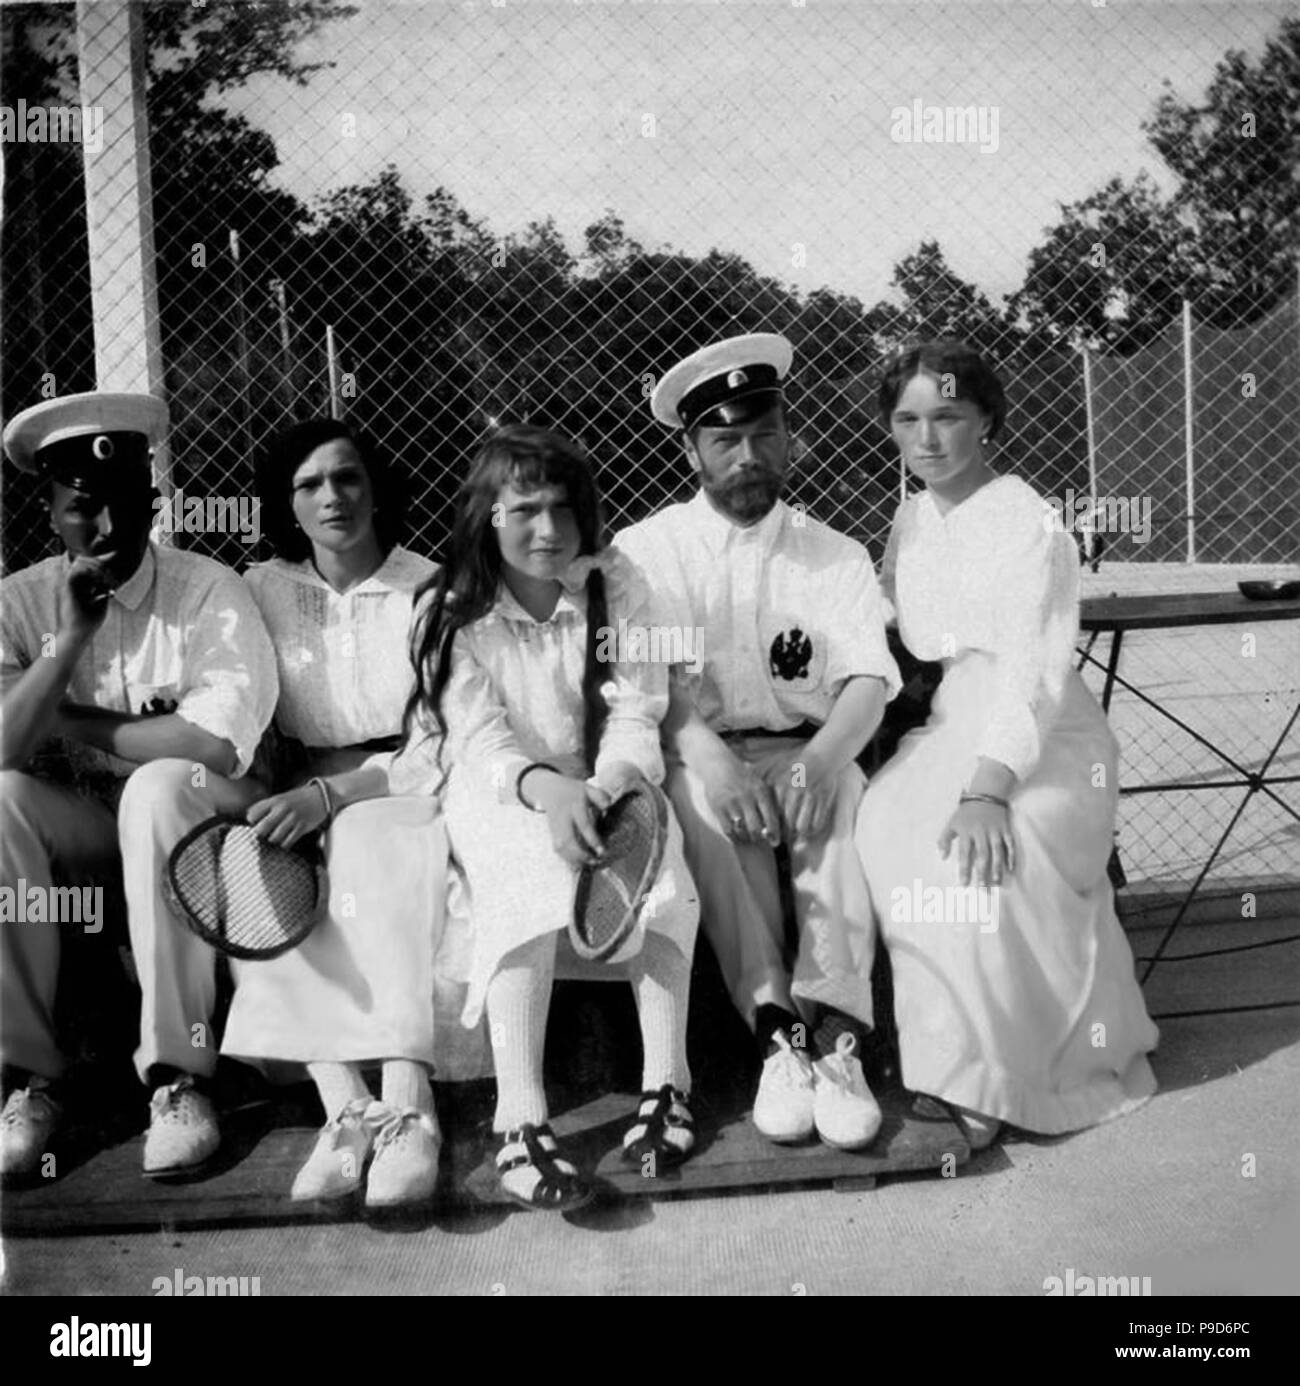 Nicholas II of Russia with daughters on the tennis court. Museum: State Central Museum of Contemporary History of Russia, Moscow. Stock Photo